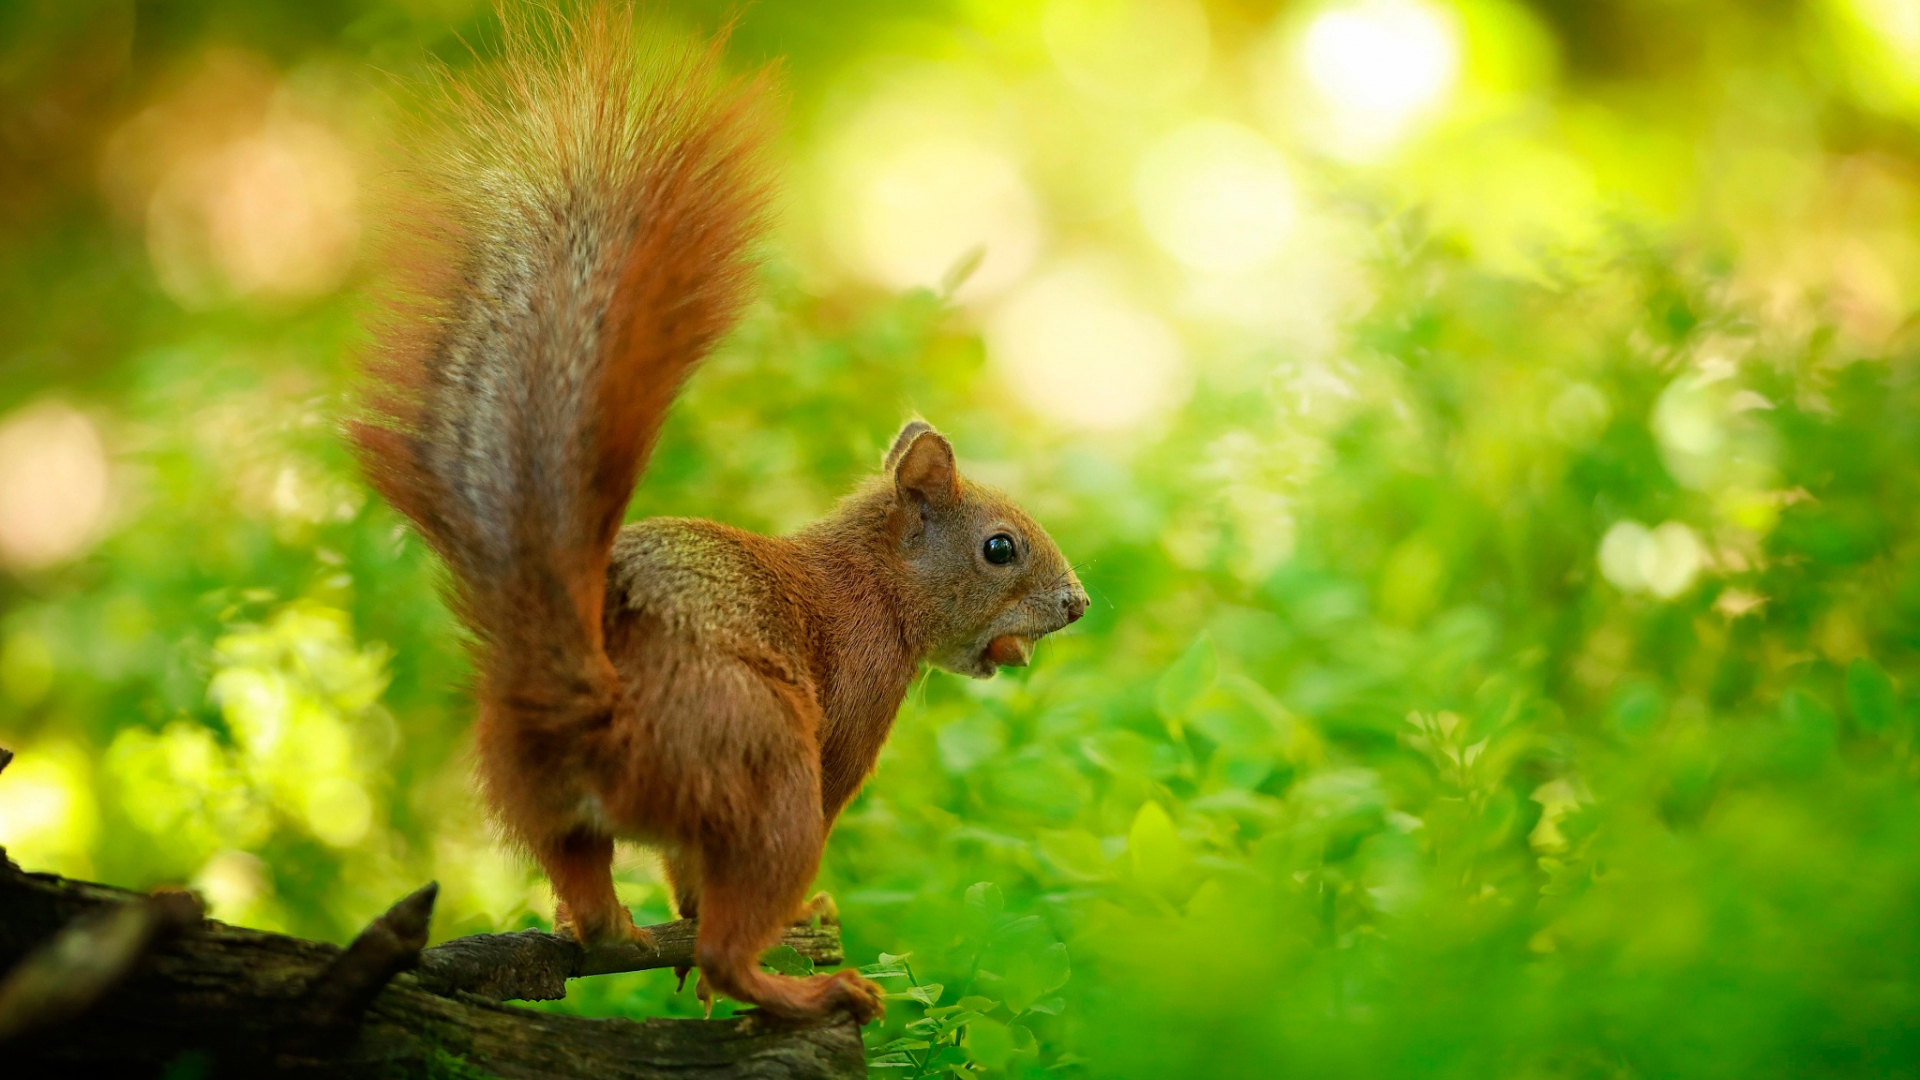 Desktop Wallpaper Rodent, Squirrel, Small Animal, Hd Image, Picture ...